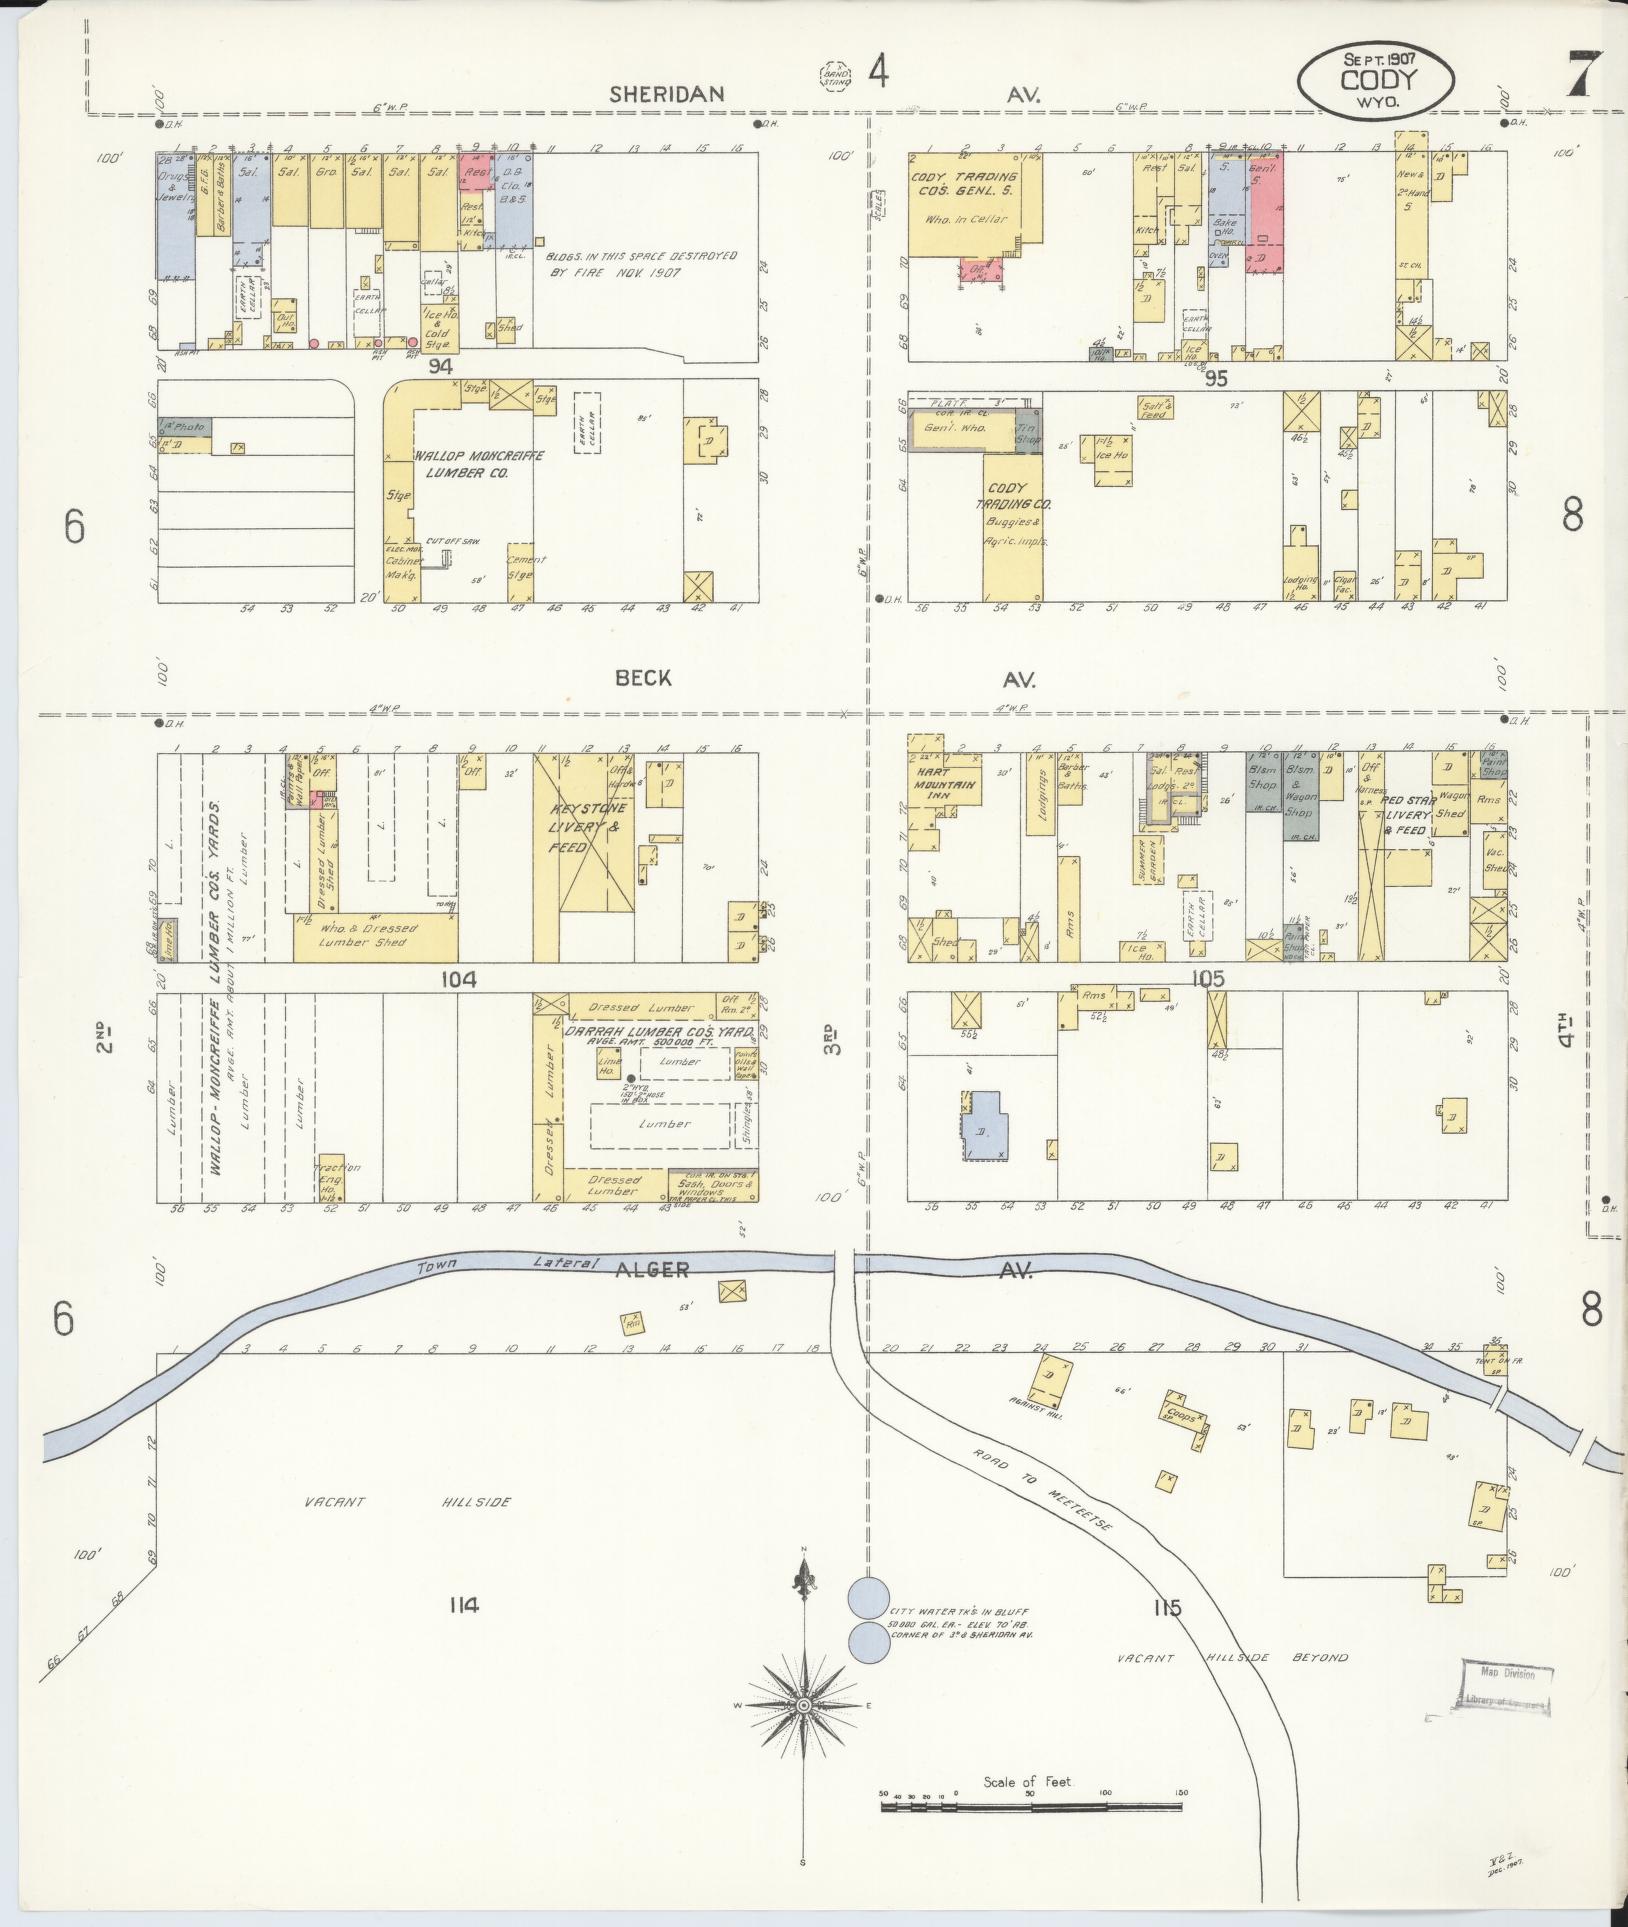 Fire insurance map showing Sheridan Avenue, Beck Avenue, and the town lateral